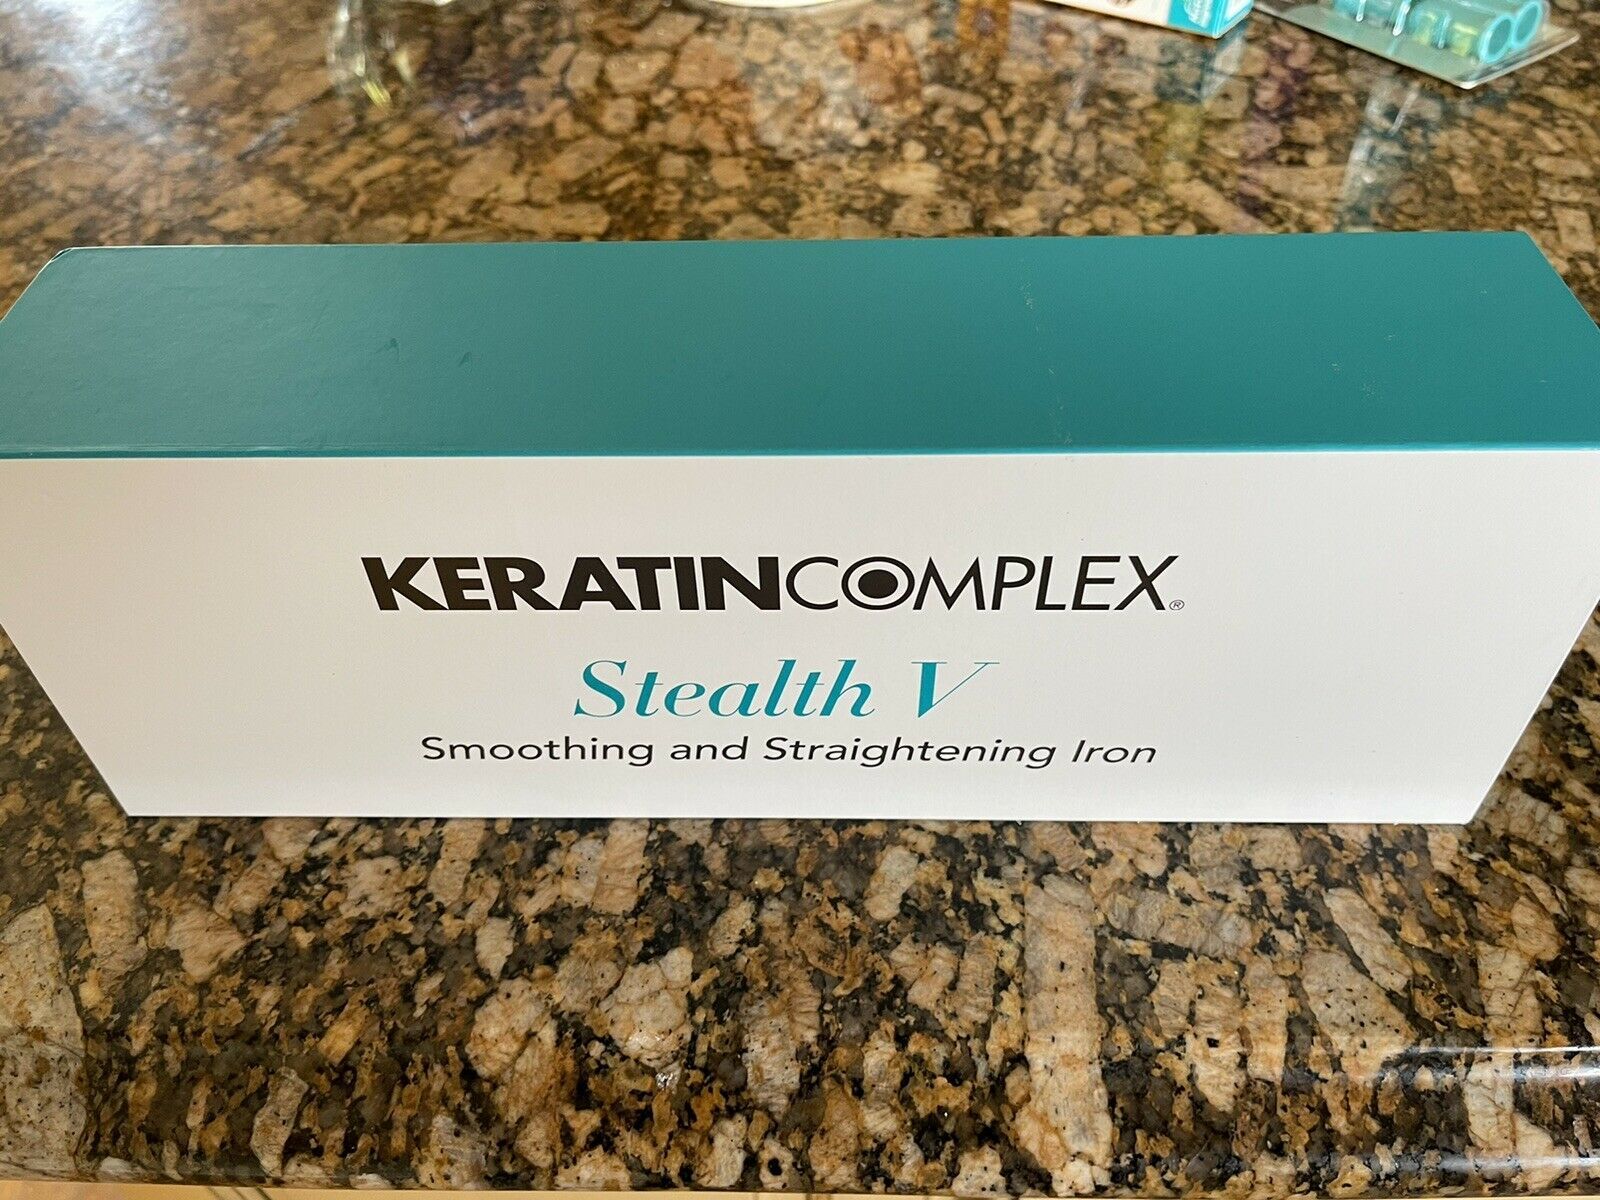 Keratin Complex Stealth V Titanium Digital Smoothing Flat Iron ( New package Box - $197.99